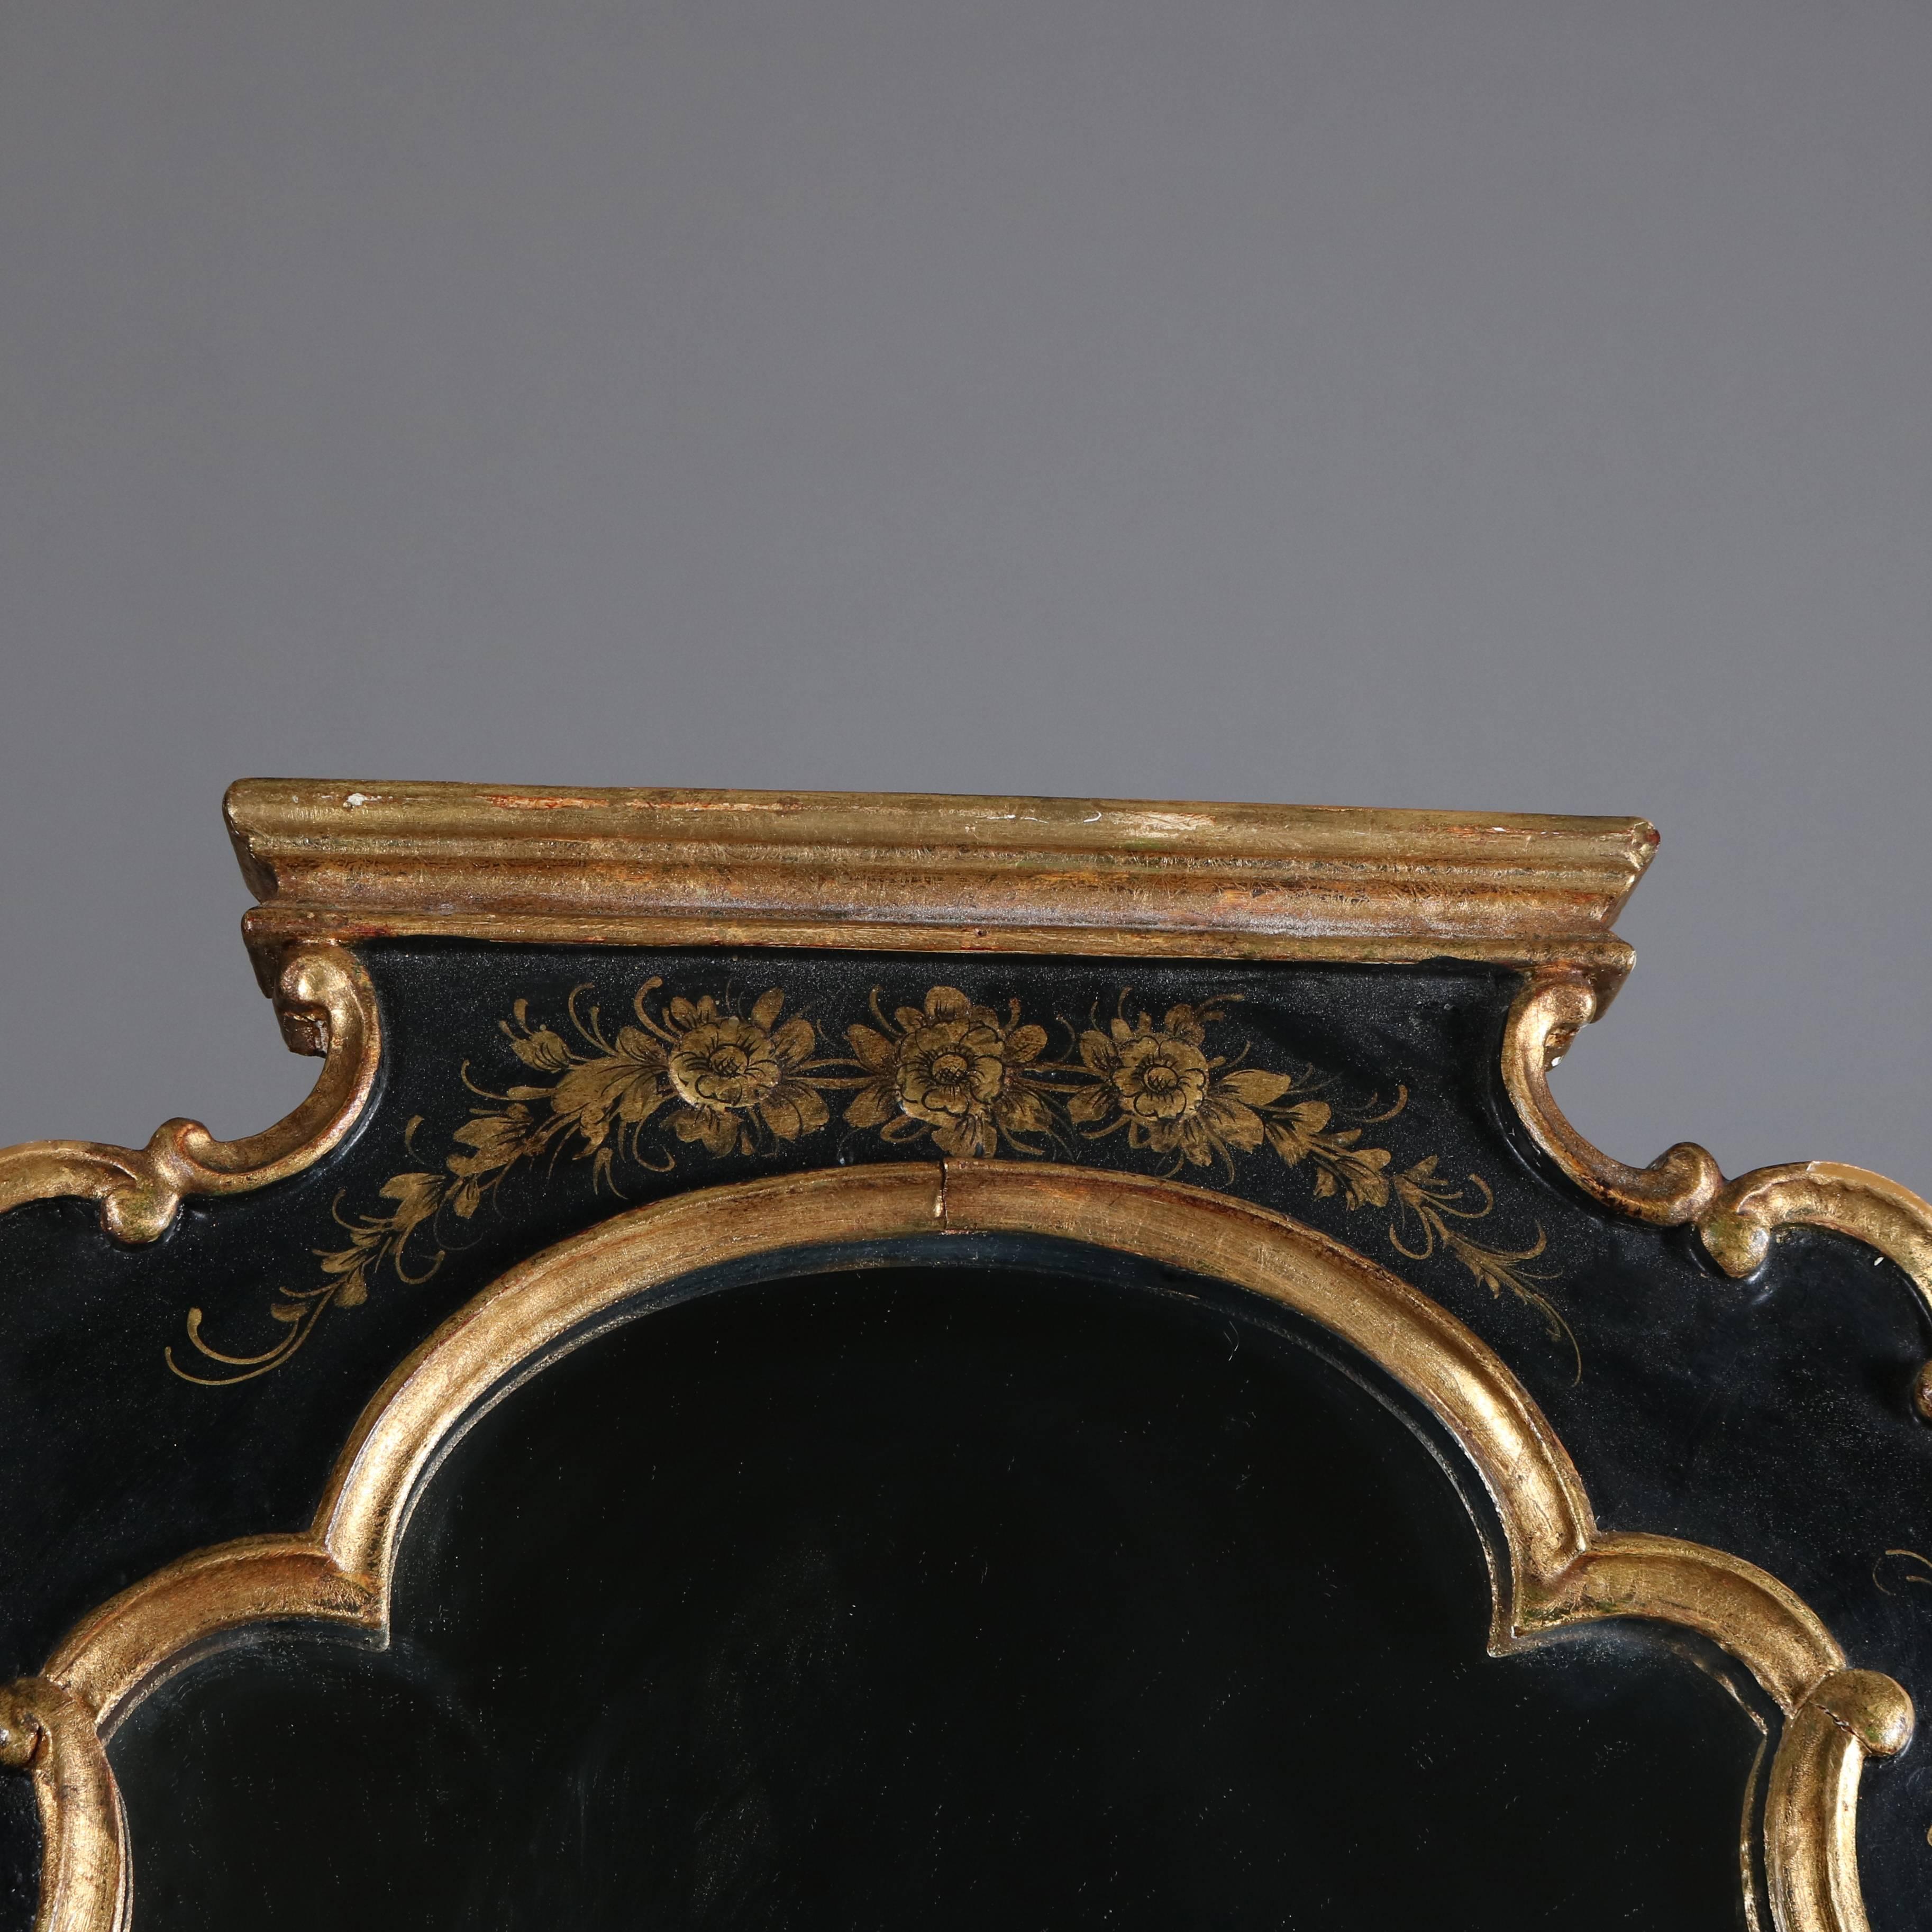 European Antique Chinoiserie Hand-Painted Gilt Ebonized Triptych over Mantel Mirror